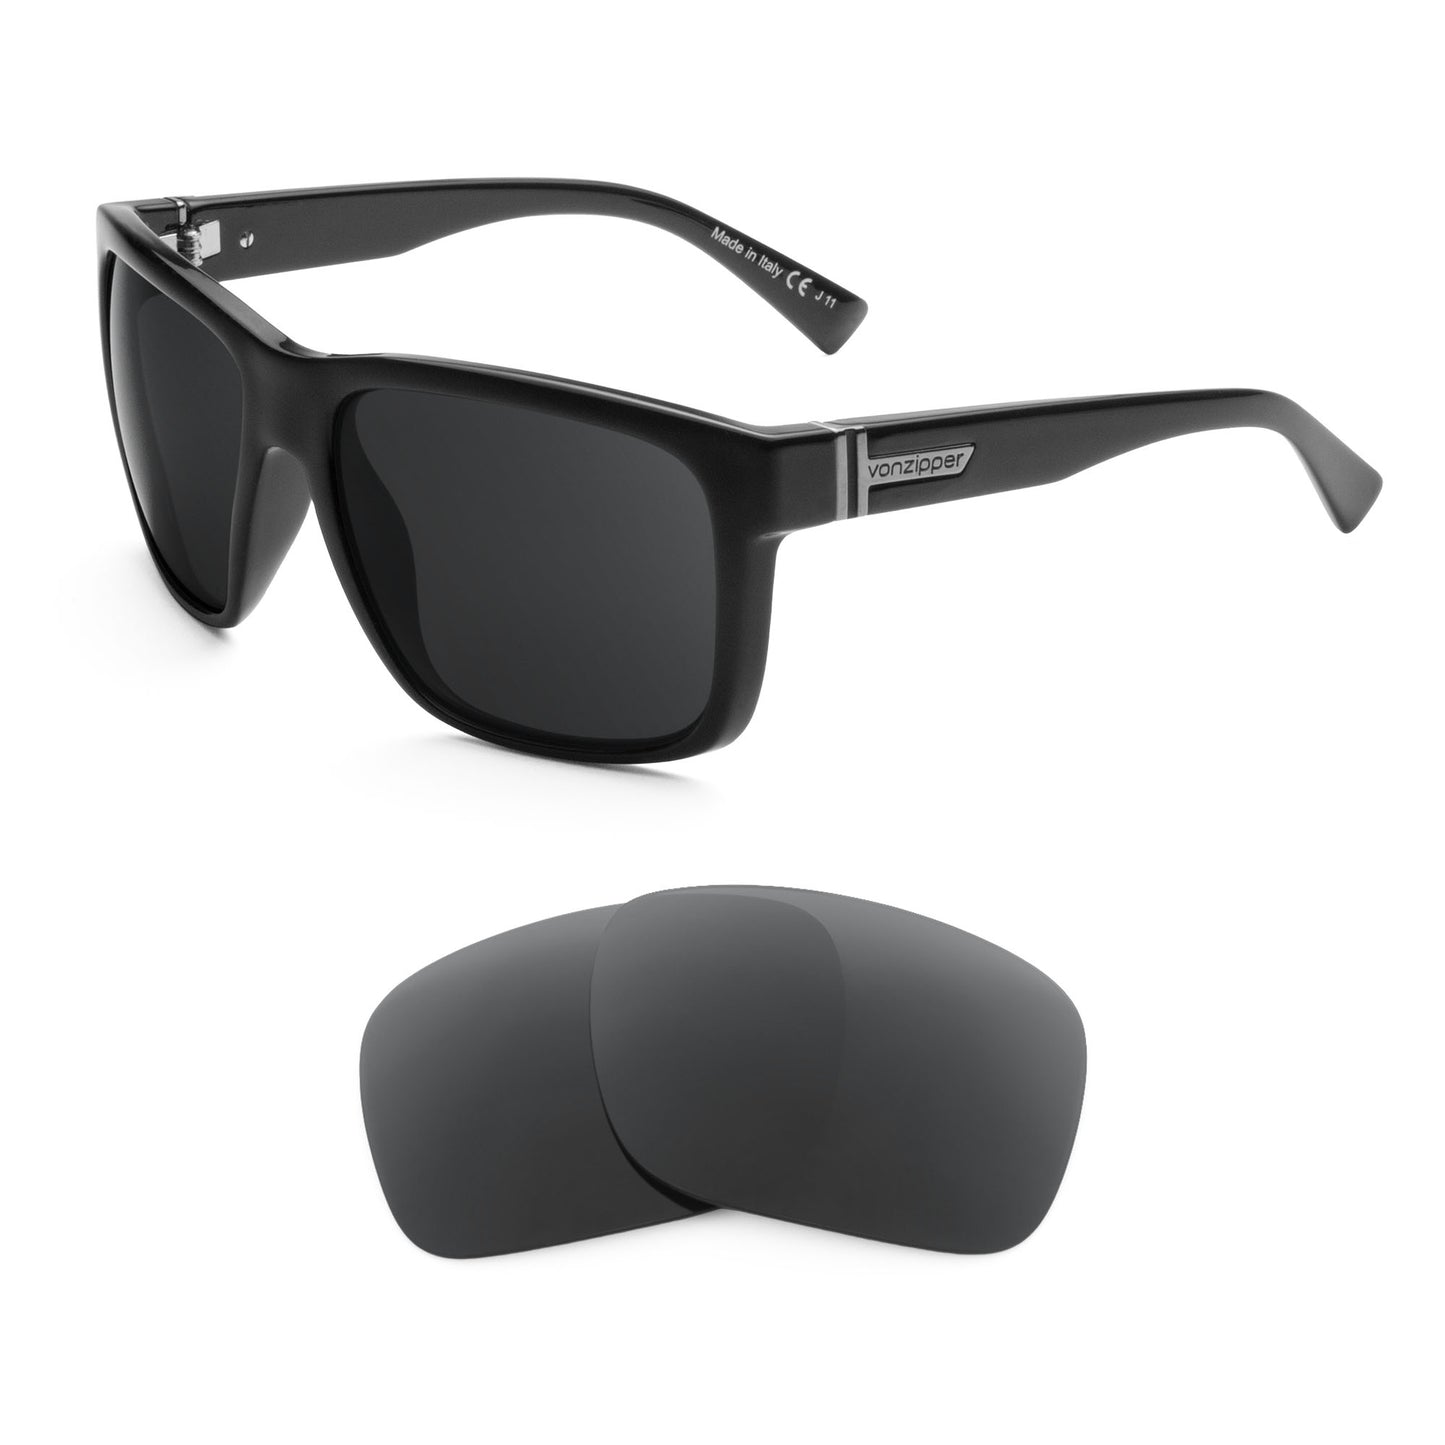 VonZipper Maxis sunglasses with replacement lenses